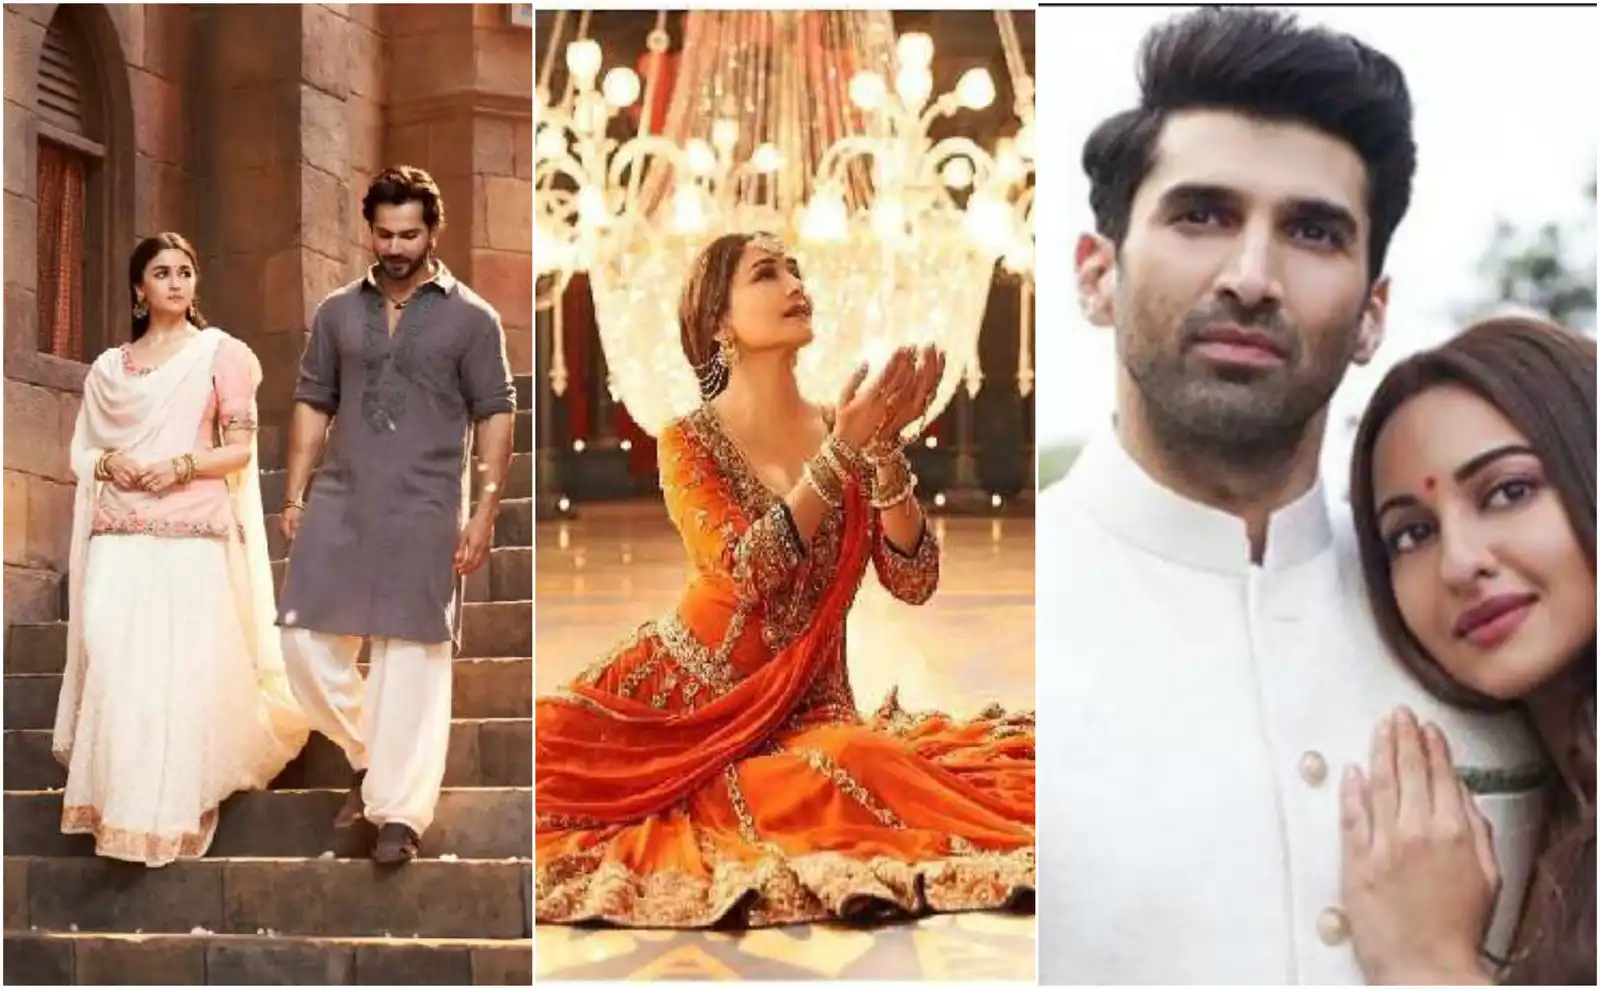 6 Important Lessons That The Demise Of Kalank At the Box-Office Taught Us